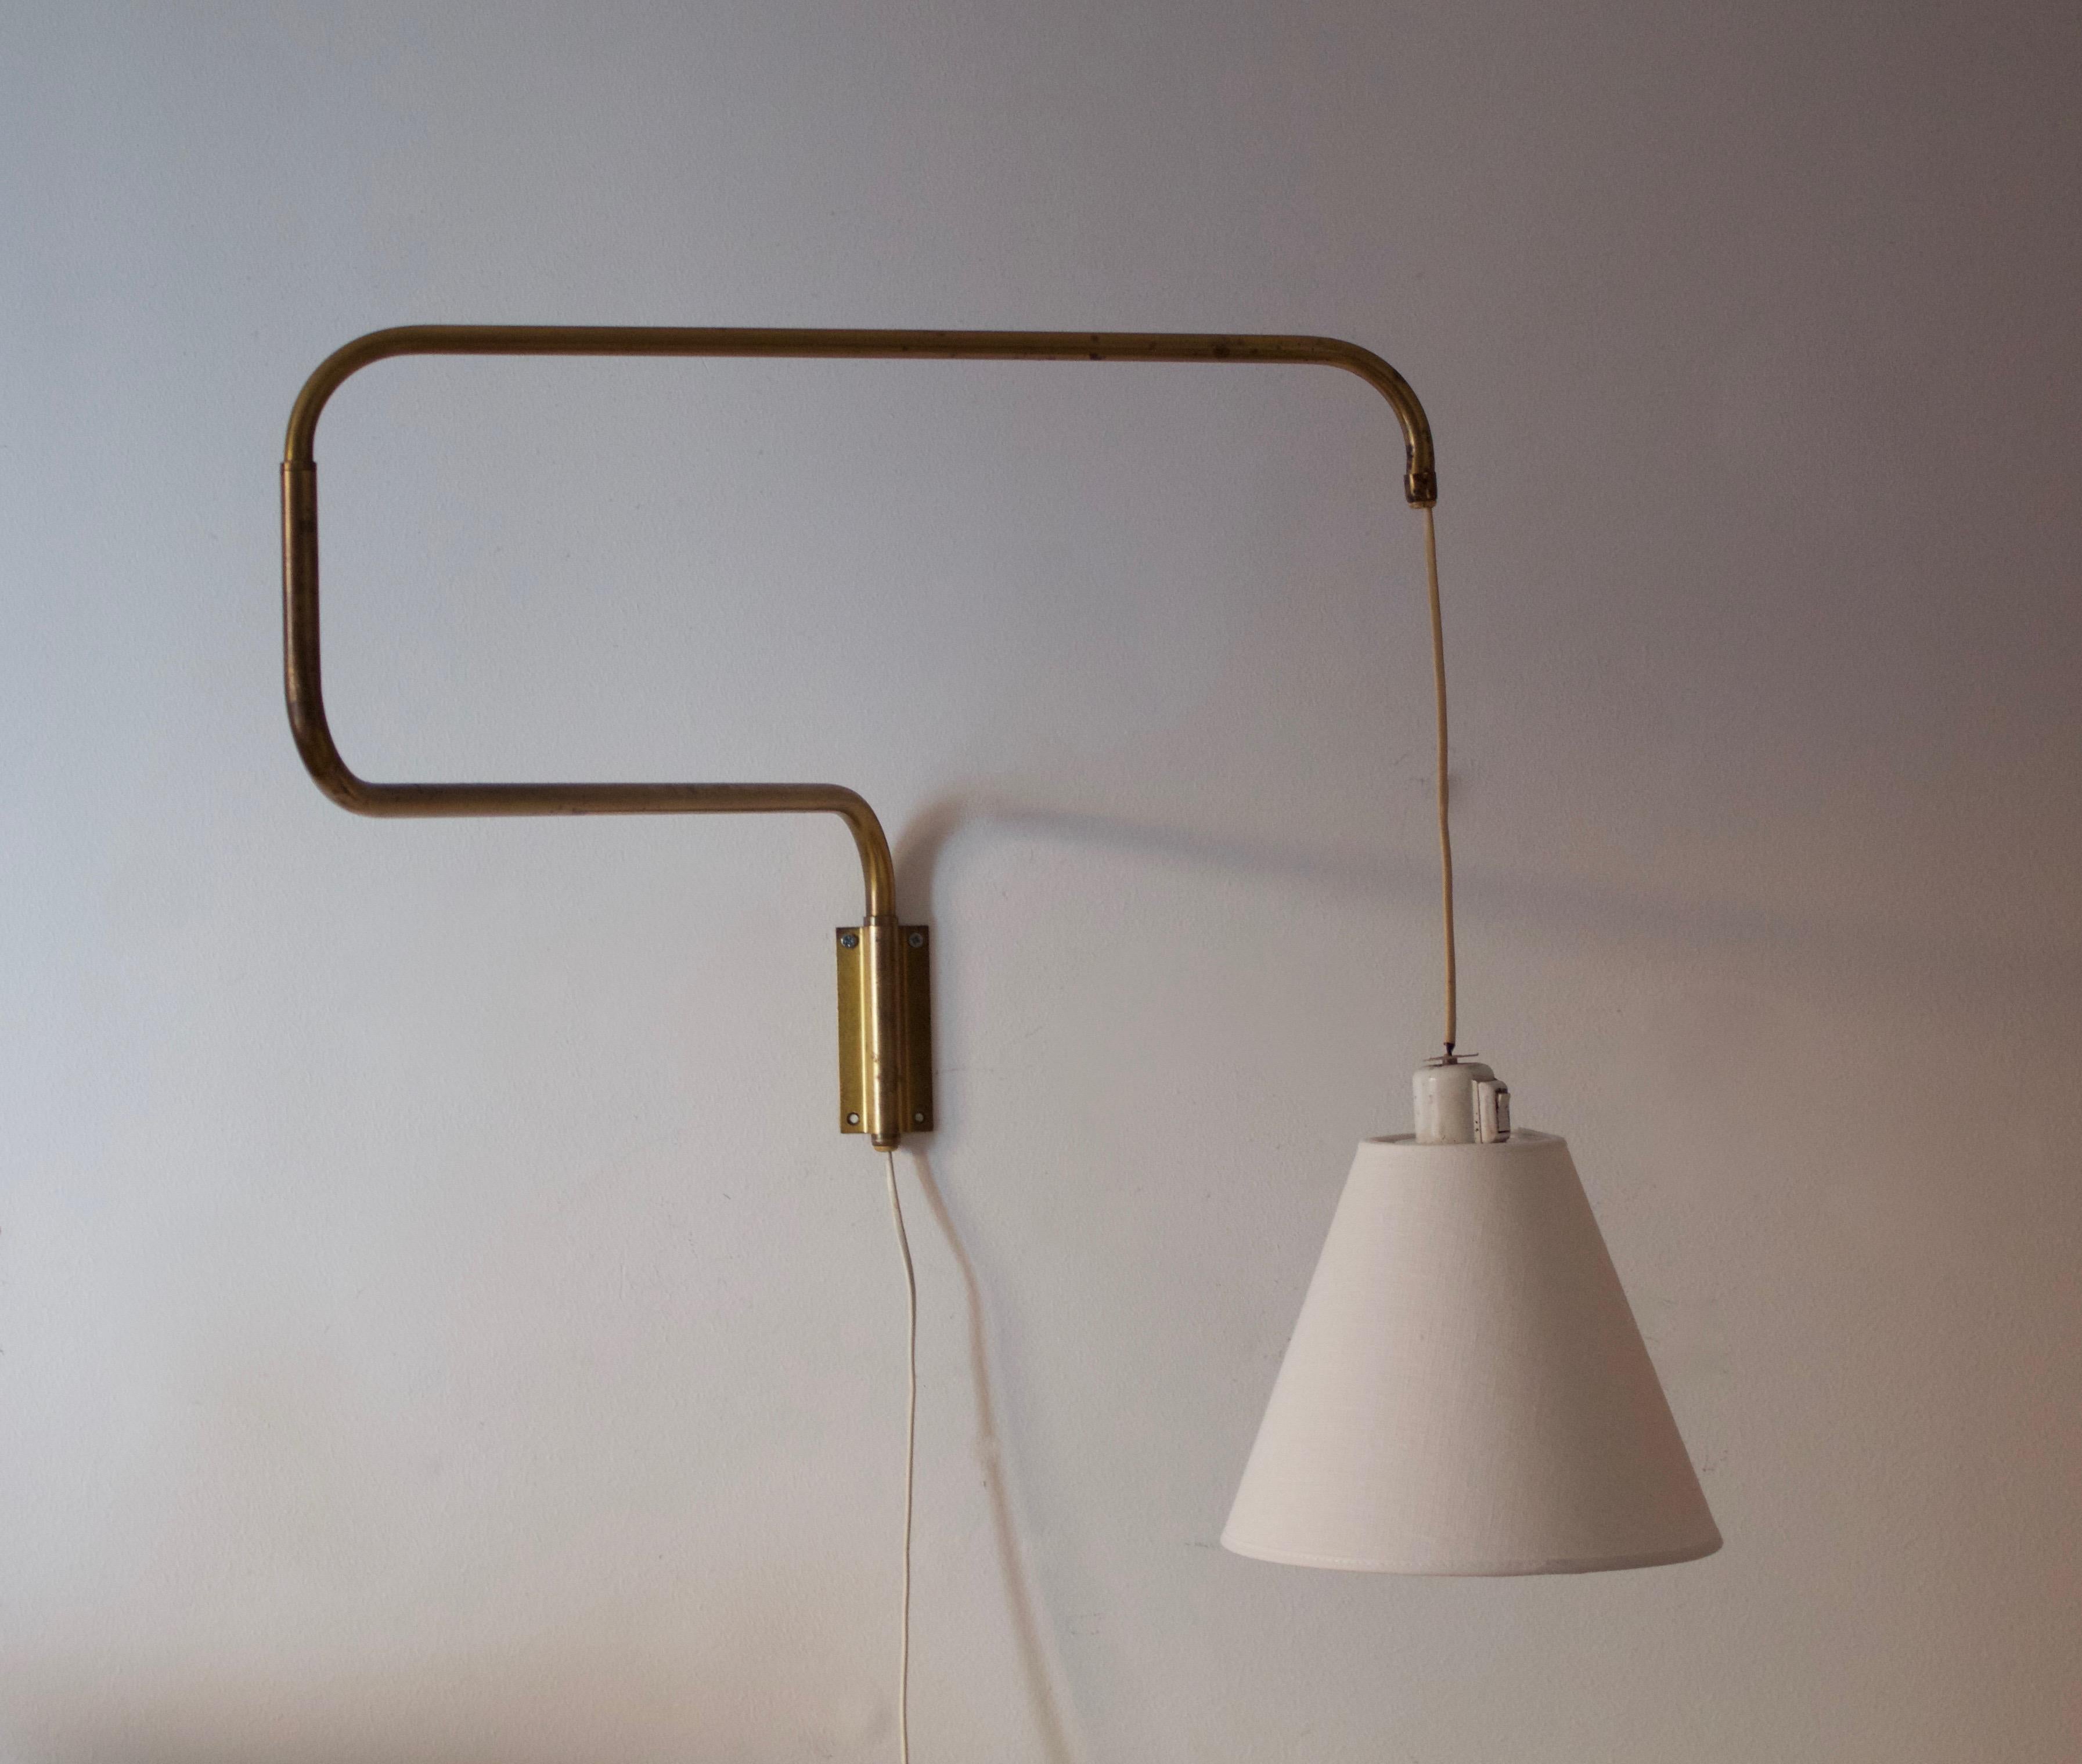 An adjustable modernist wall light. Designed and produced in Sweden, 1950s. Brand new lampshade. Adjustable drop.

Measured as illustrated in primary image.